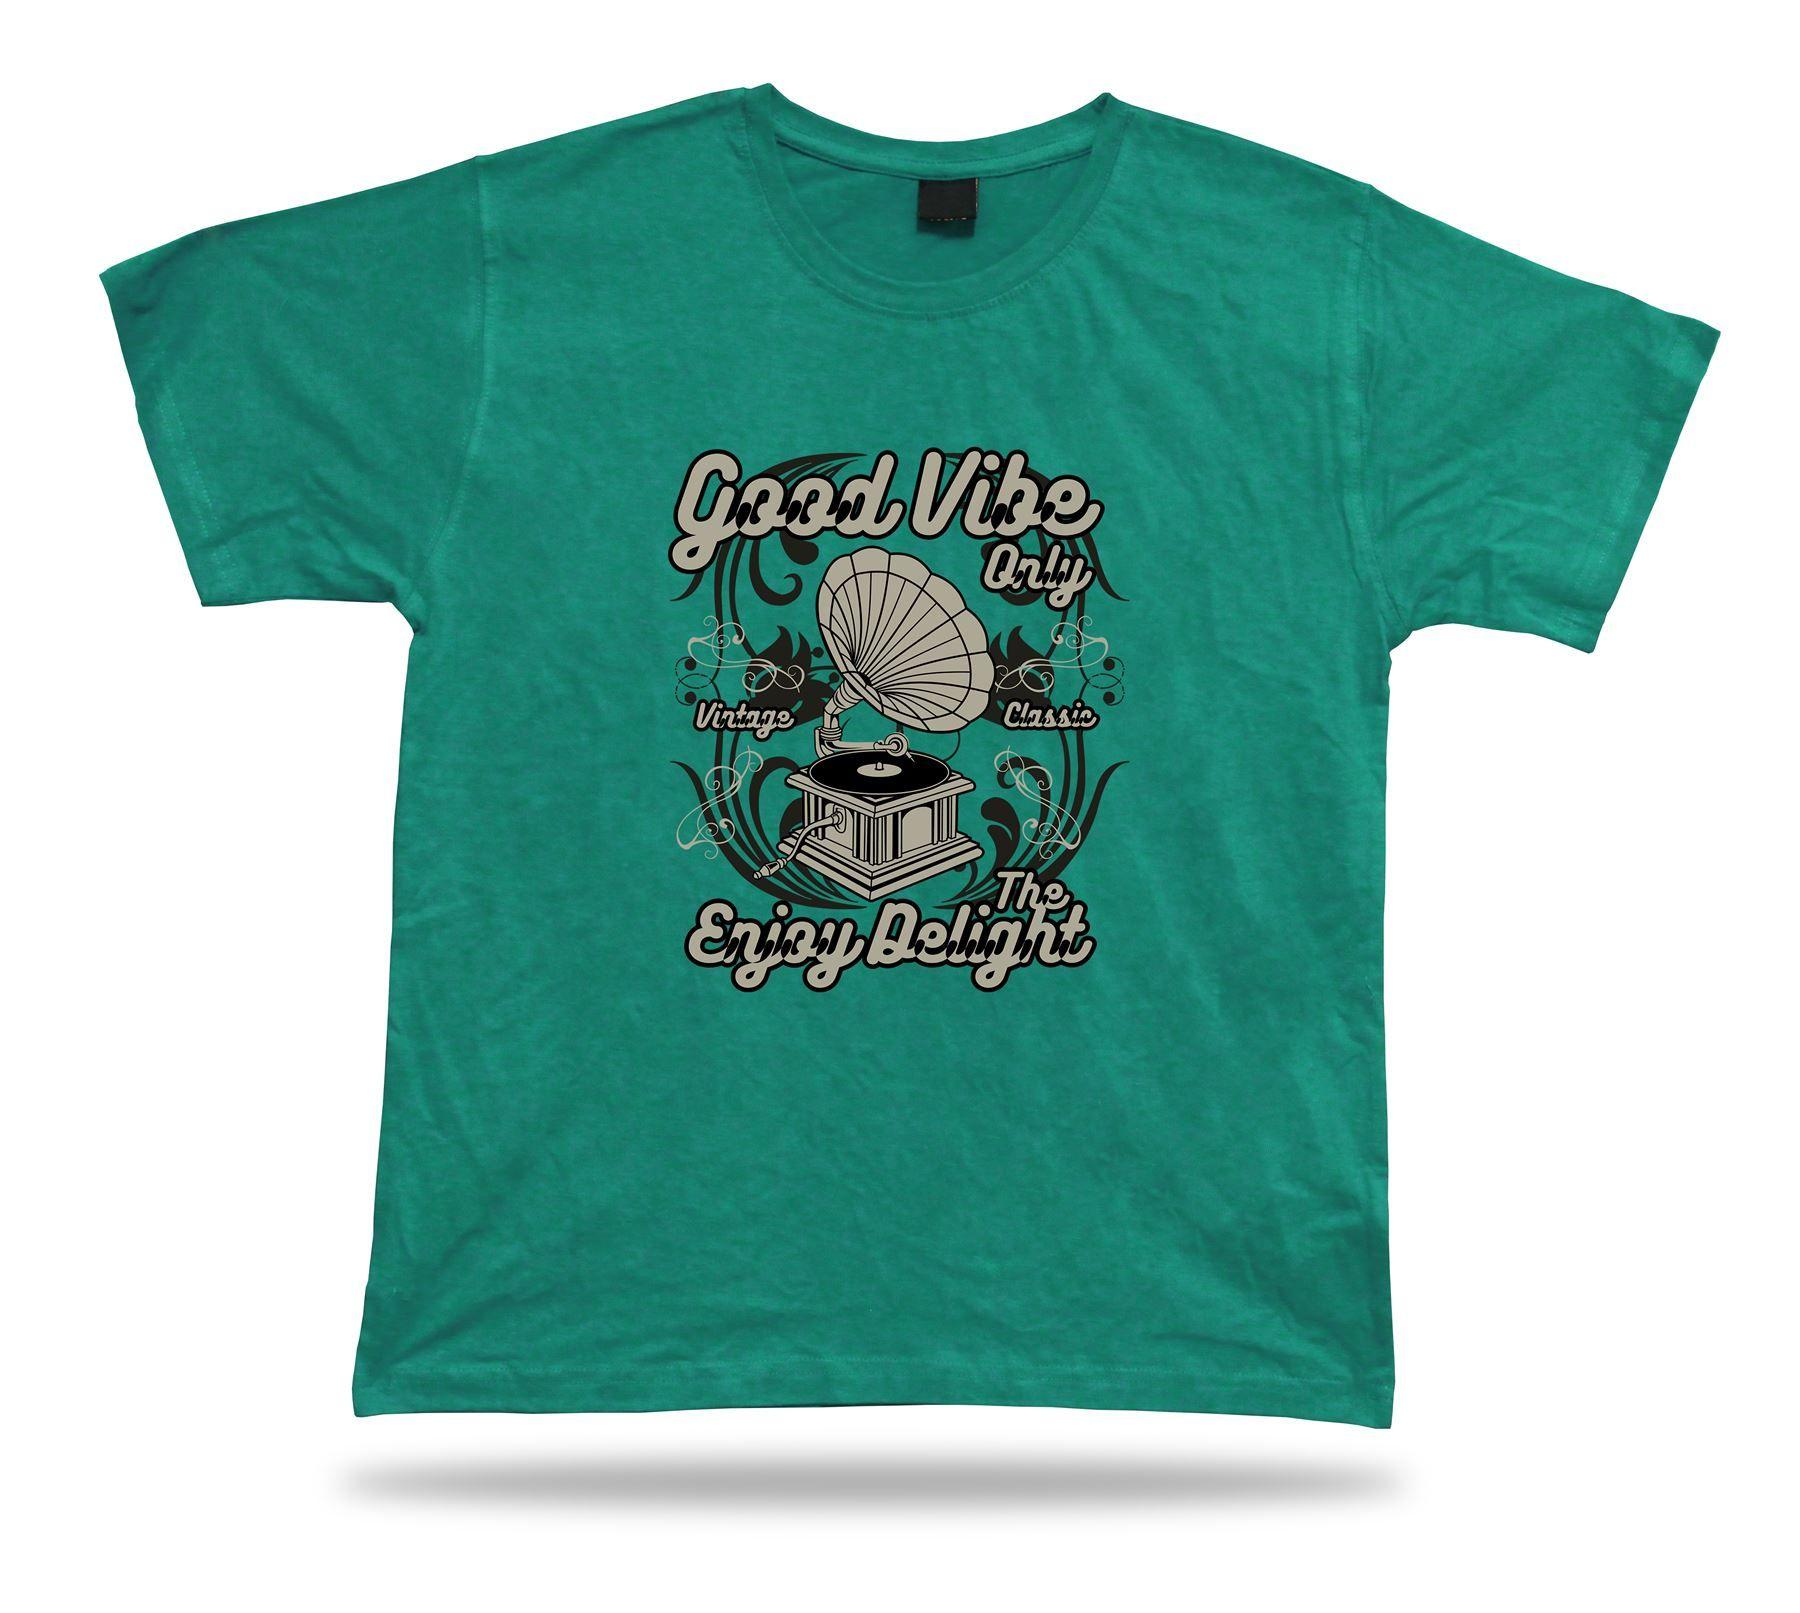 Only Clothing and Apparel Logo - Goodvibe only the enjoy delight vintage new apparel t shirt design